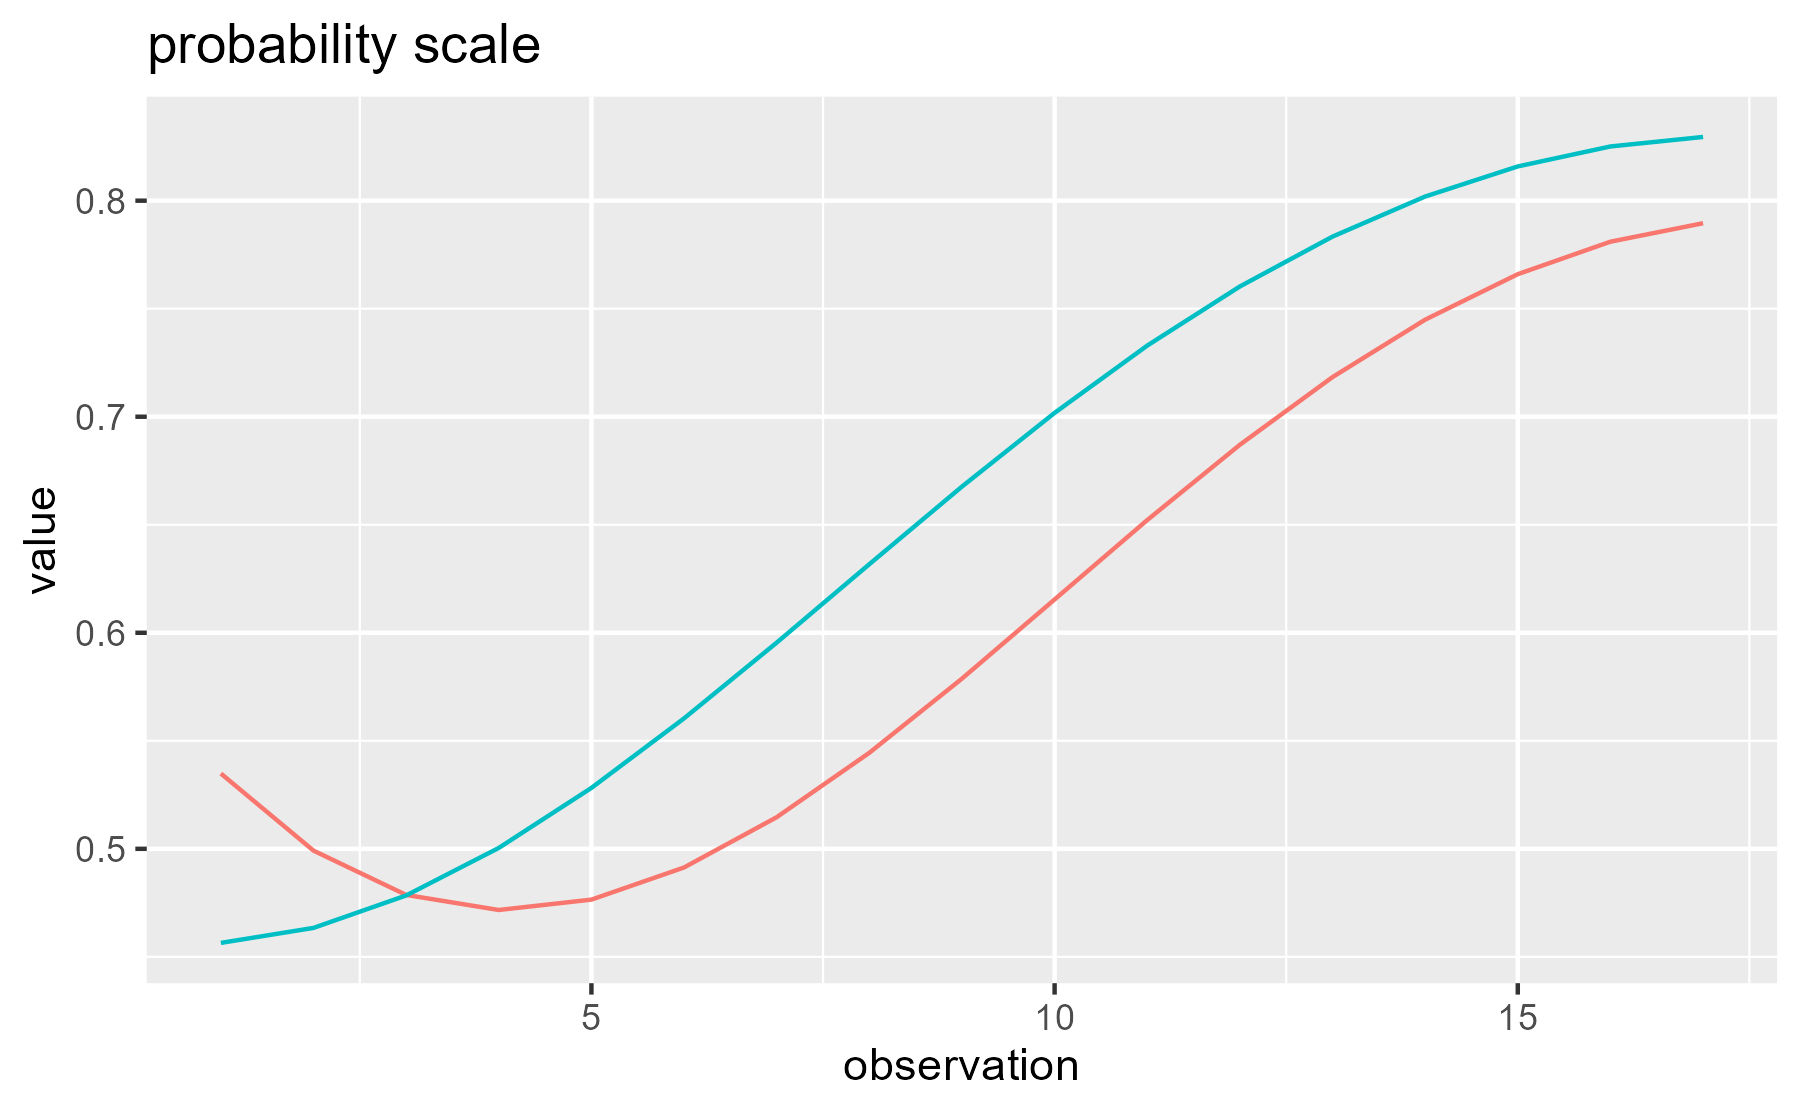 Comparison of the growth curves in logit scale and probability scale